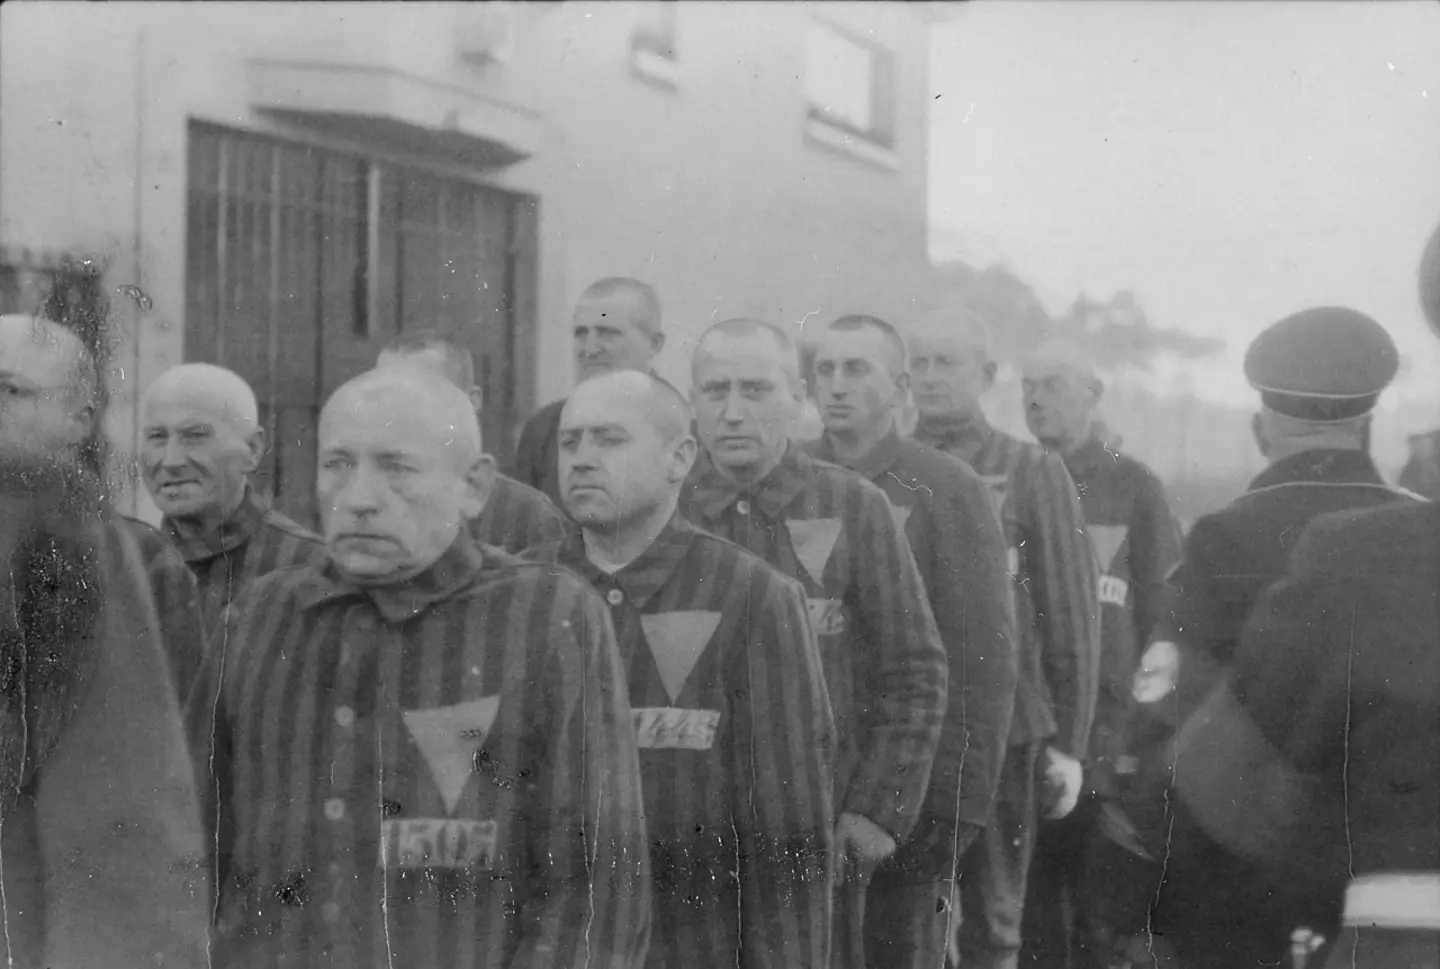 Prisoners in the concentration camp at Sachsenhausen, Germany.